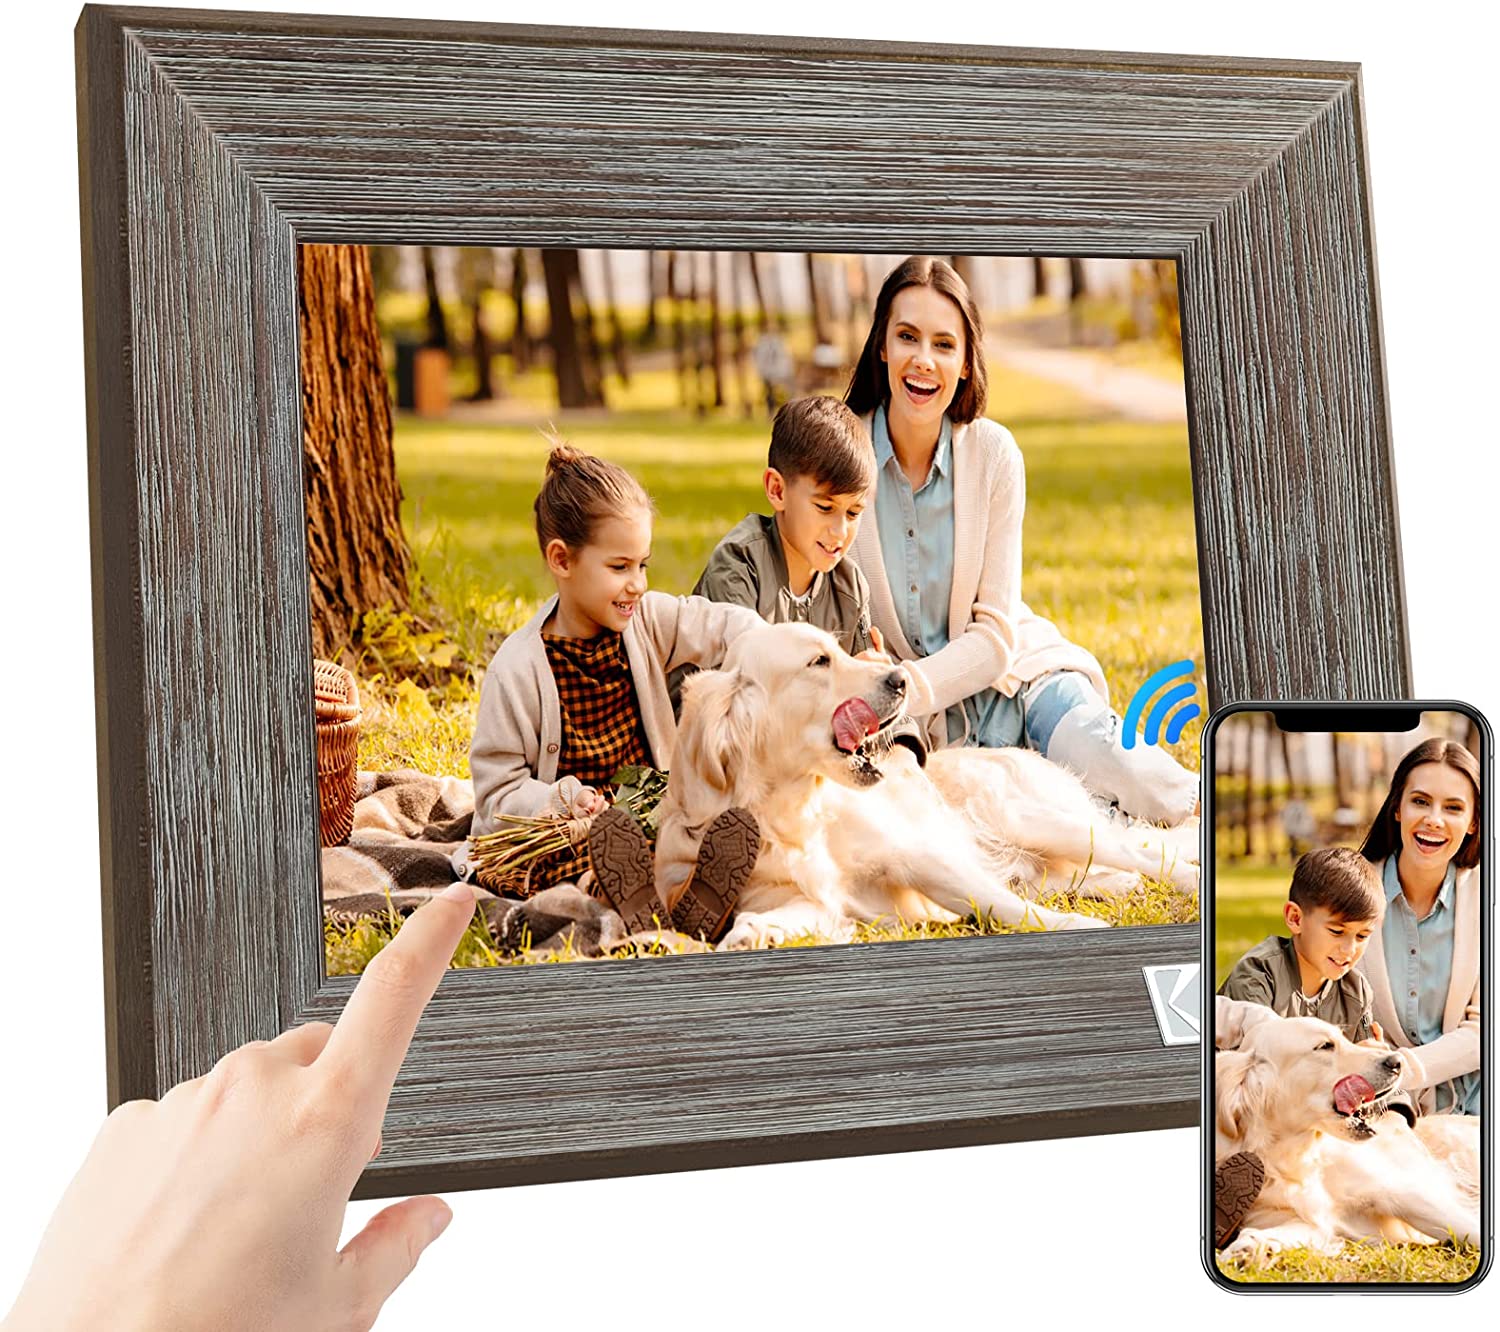 Kodak 8-inch Wi-Fi Classic Digital Photo Frame RCF-8013W, Touch Screen, Wooden Frame, 16GB Internal Memory with Music, Video, Calendar and Weather Display Features